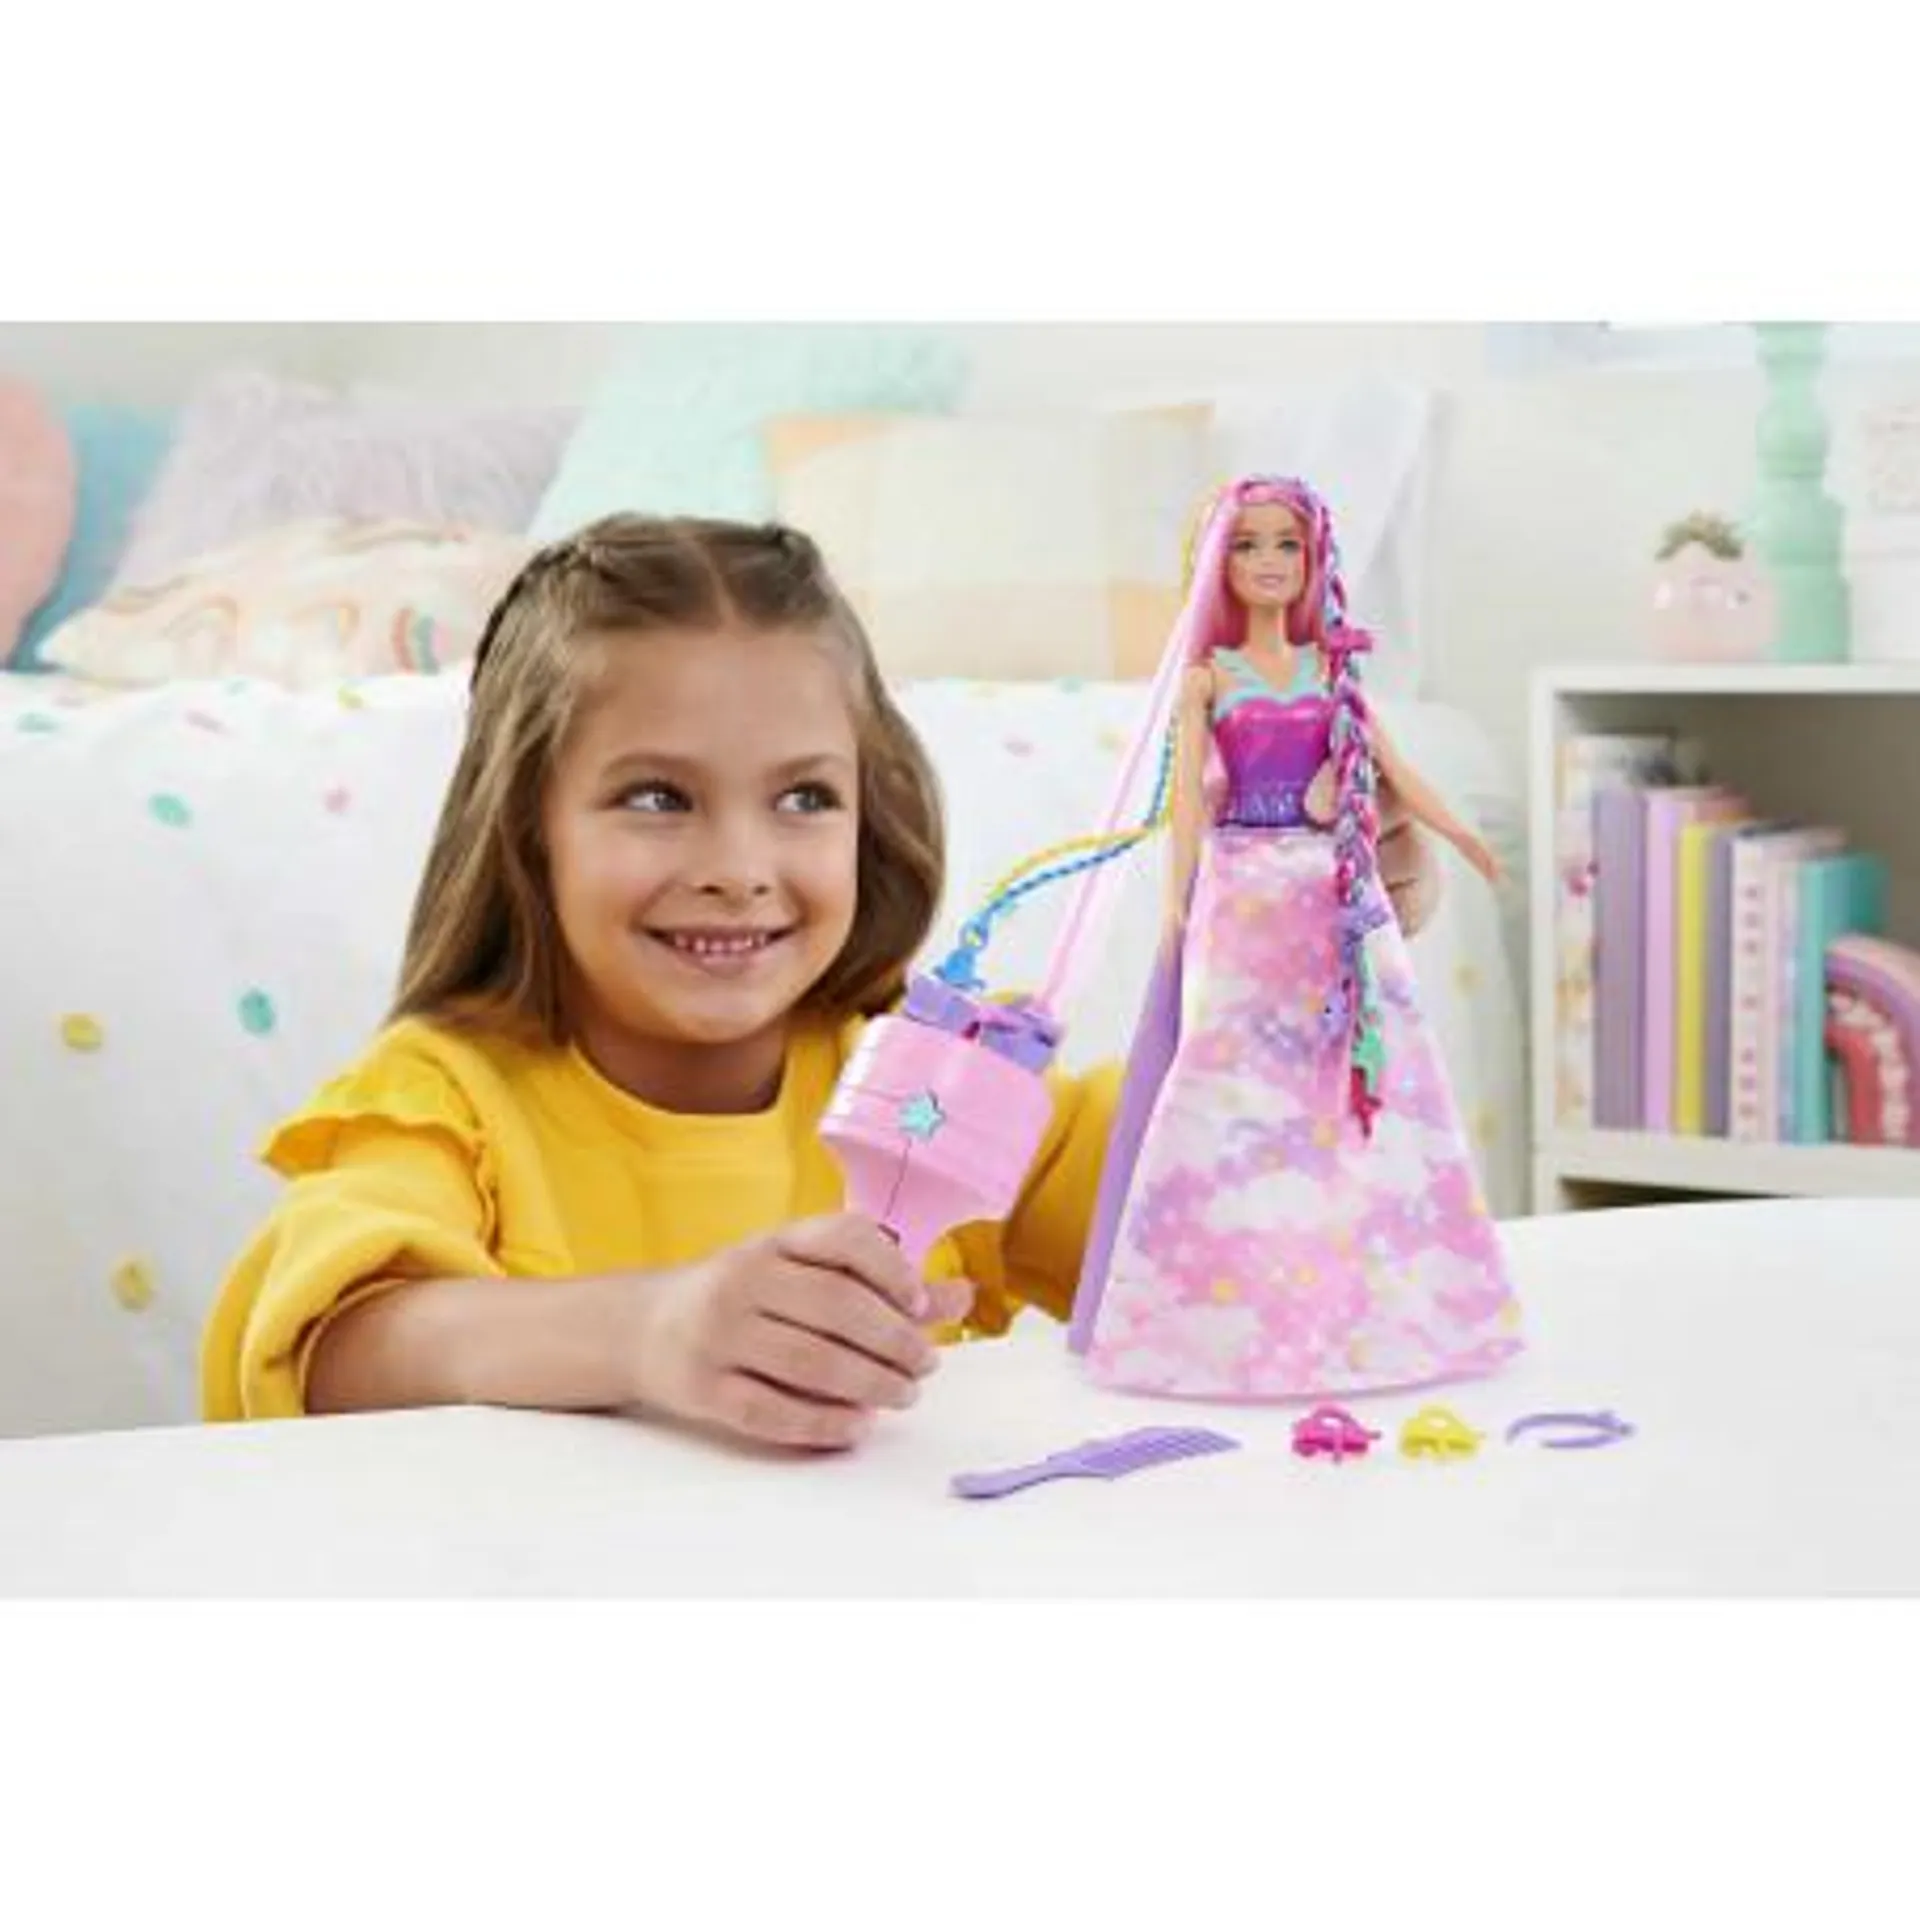 Barbie Dreamtopia Twist ‘N Style Doll And Accessories